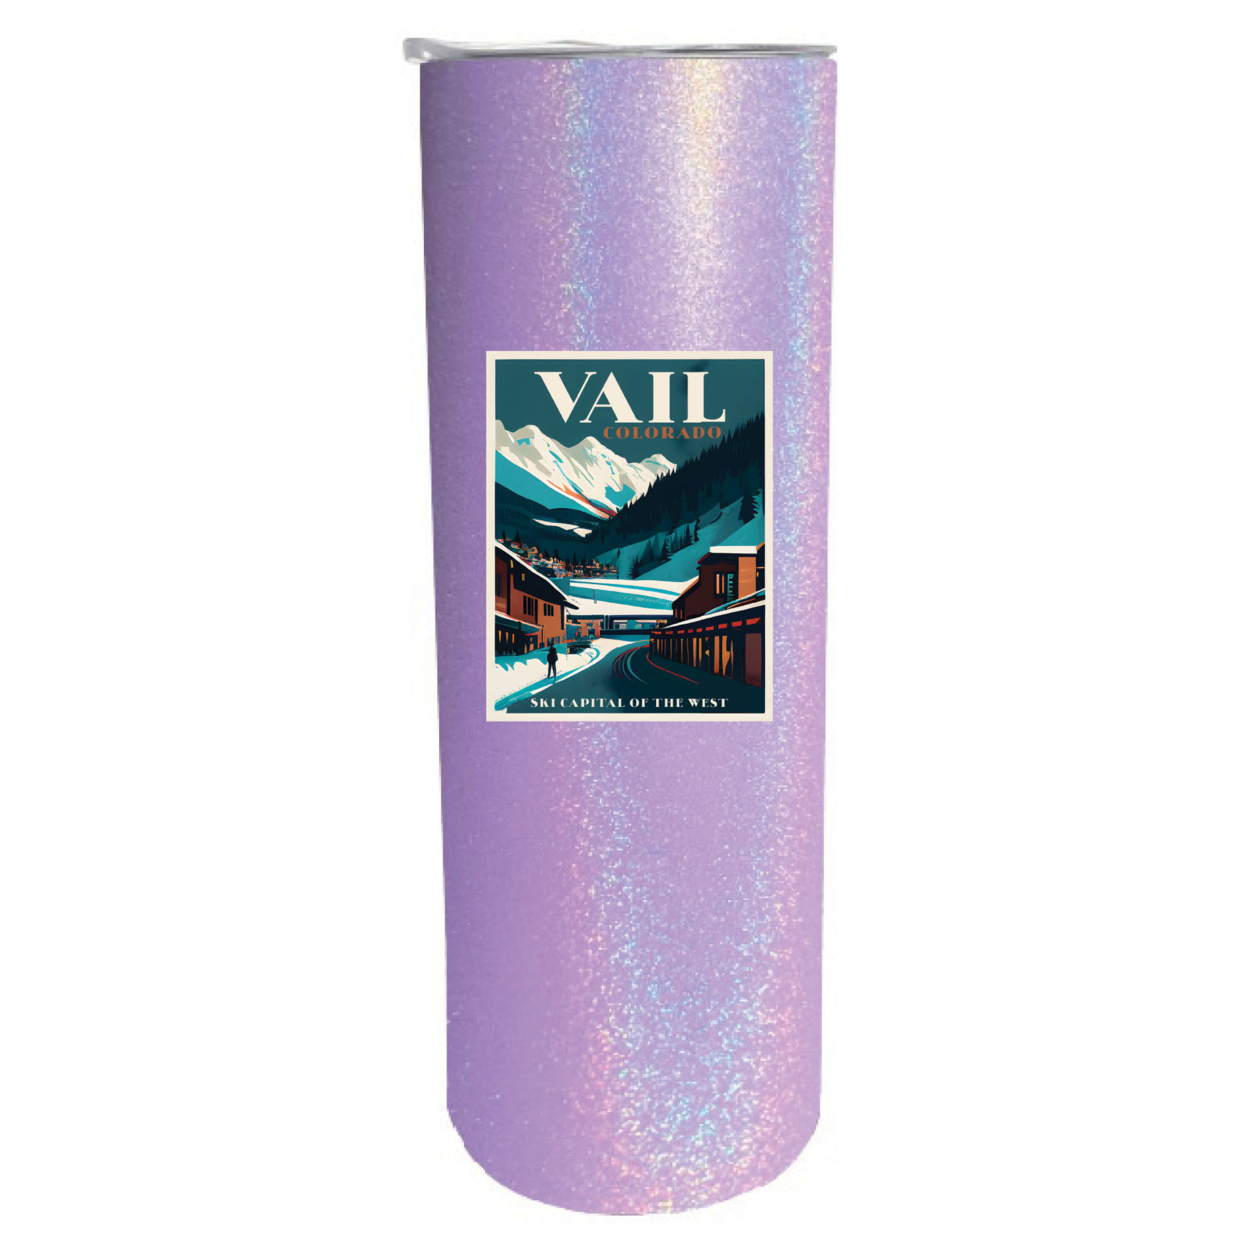 Vail Colorado Souvenir 20 Oz Insulated Stainless Steel Skinny Tumbler - Rainbow Glitter Pink